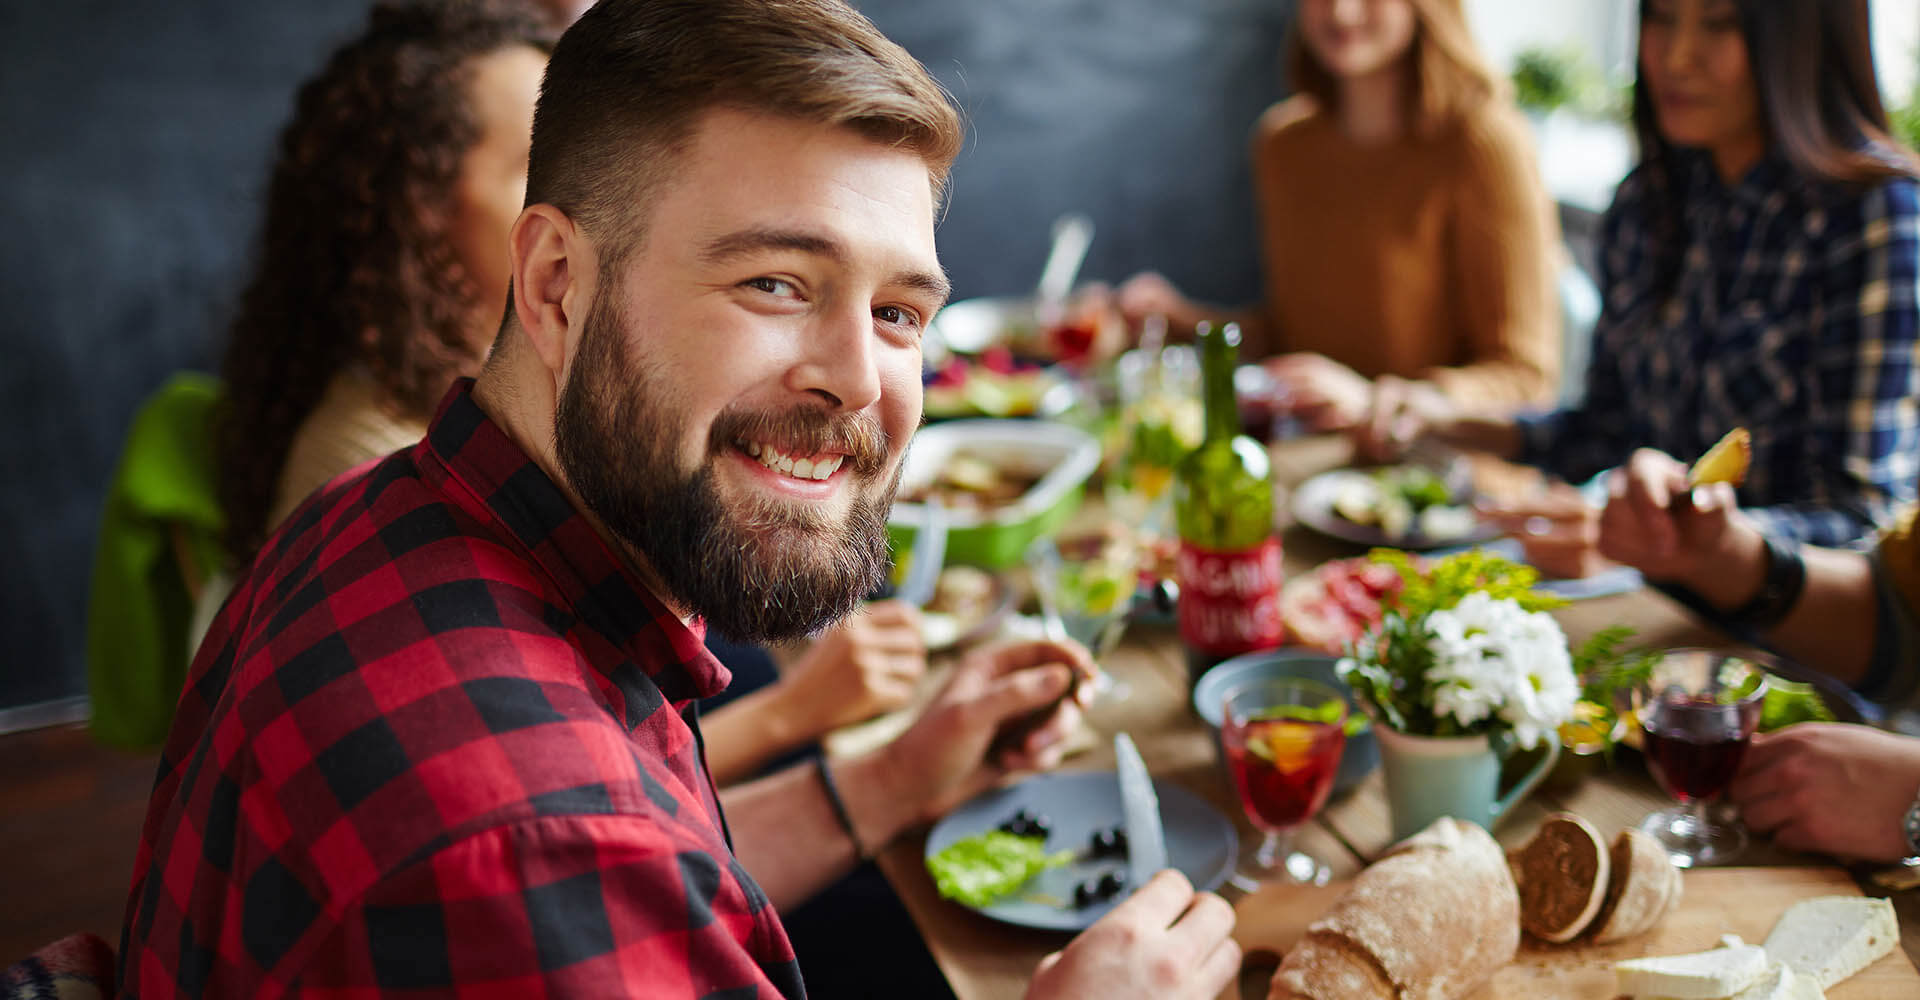 man sitting smiling at lunch table with friends and eating